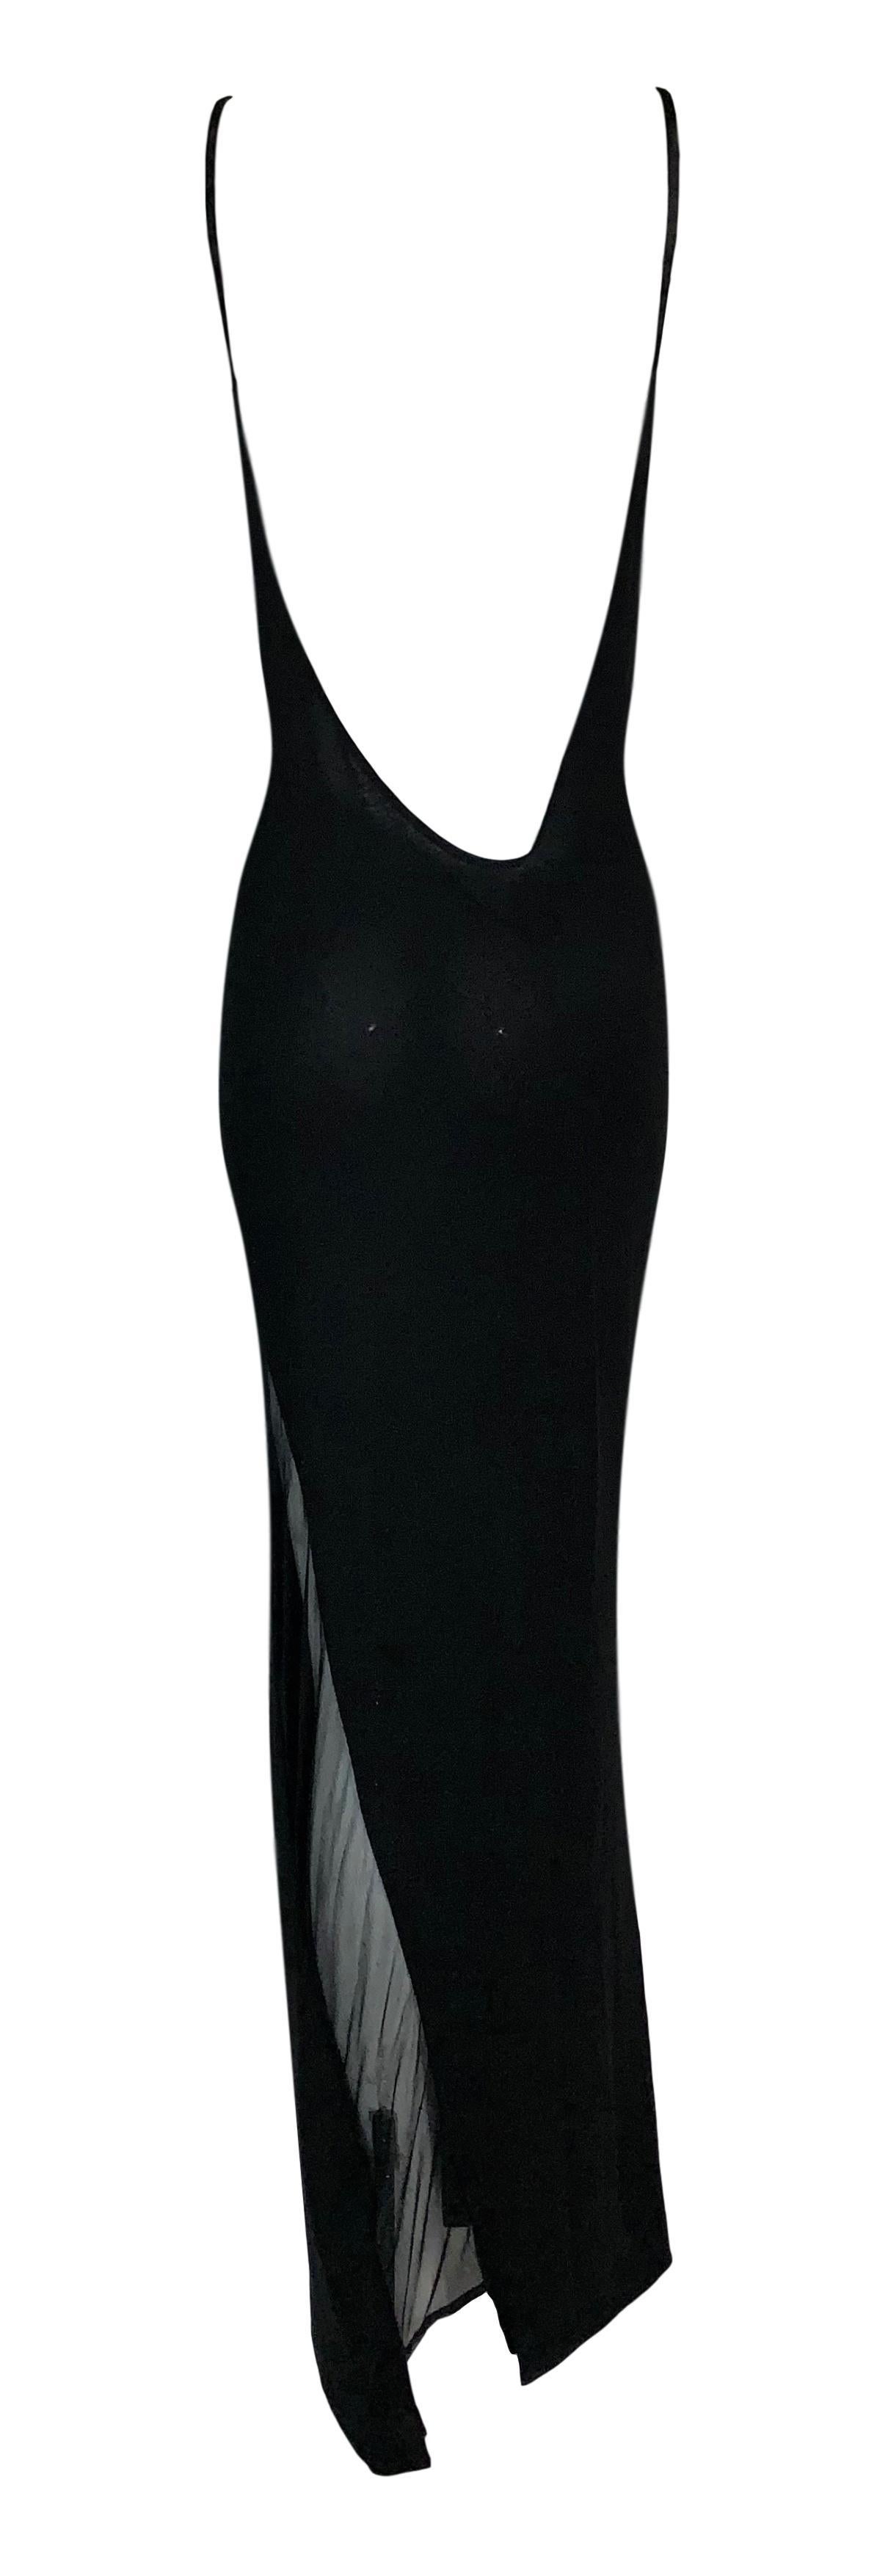 S/S 1998 Gucci by Tom Ford Black Sheer Body Panel Plunging Back Gown Dress In Good Condition In Yukon, OK